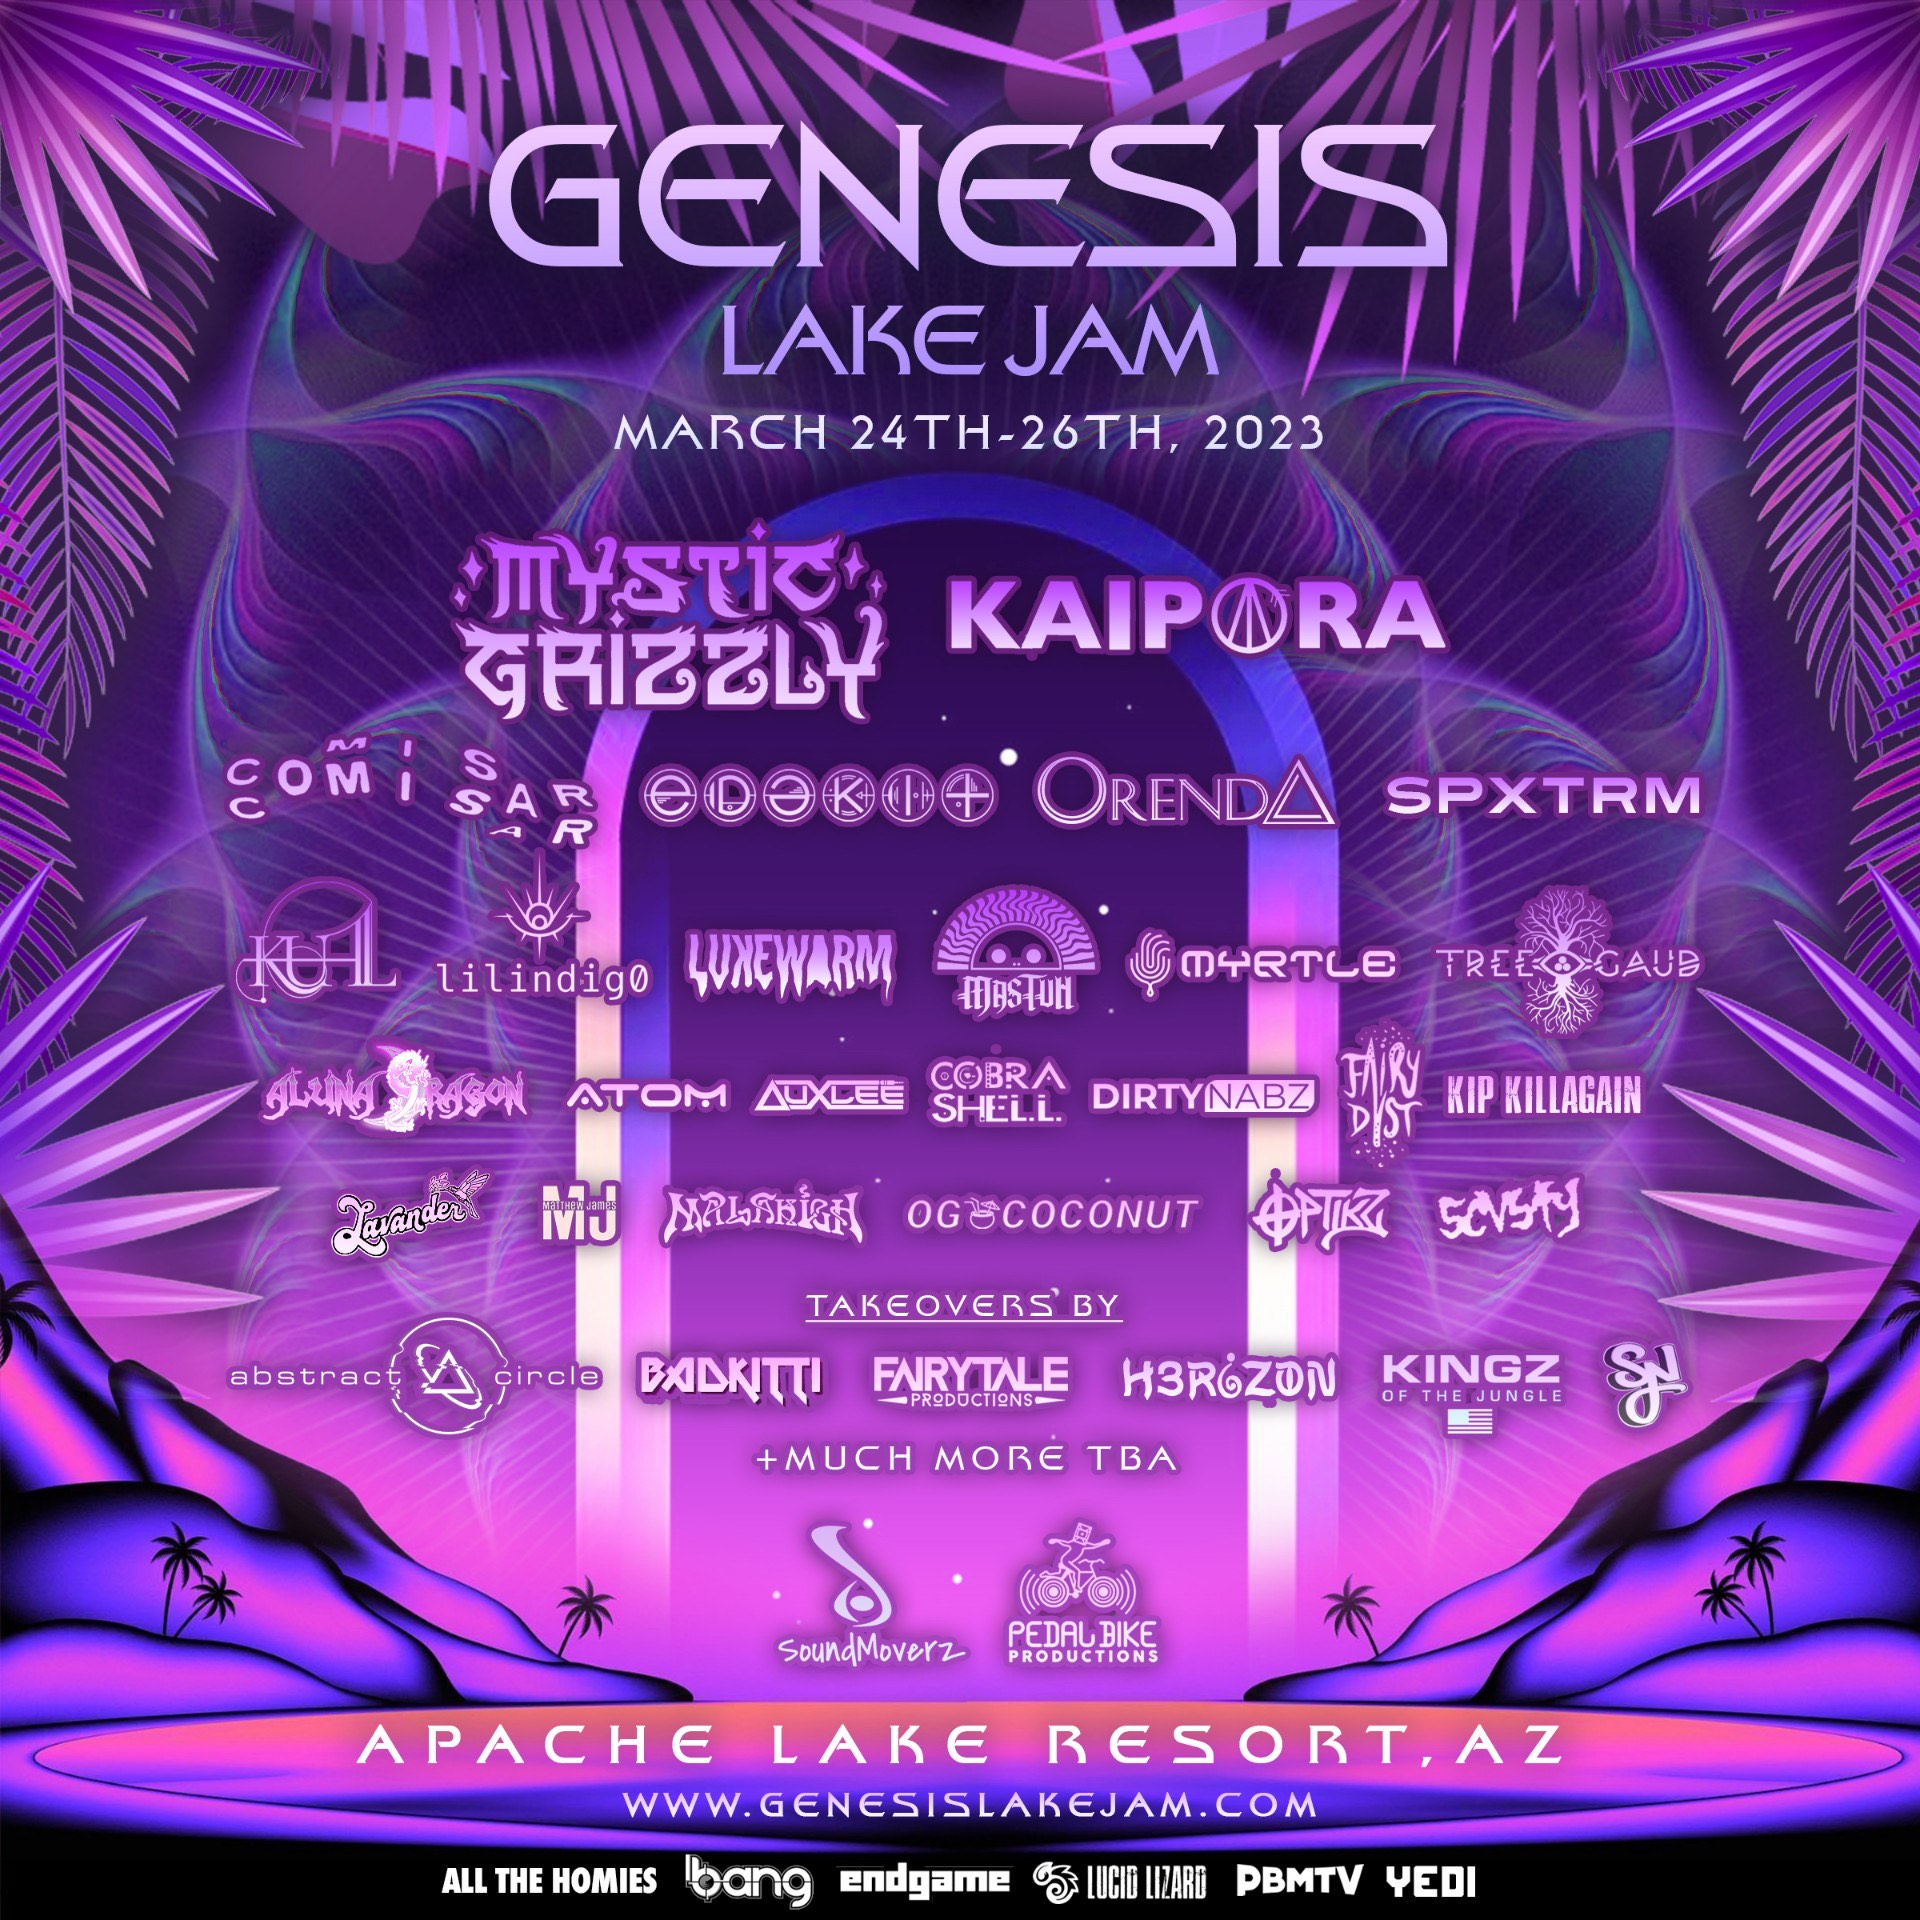 Genesis Lake Jam - March 24 to 26 - Get your Tickets Now!